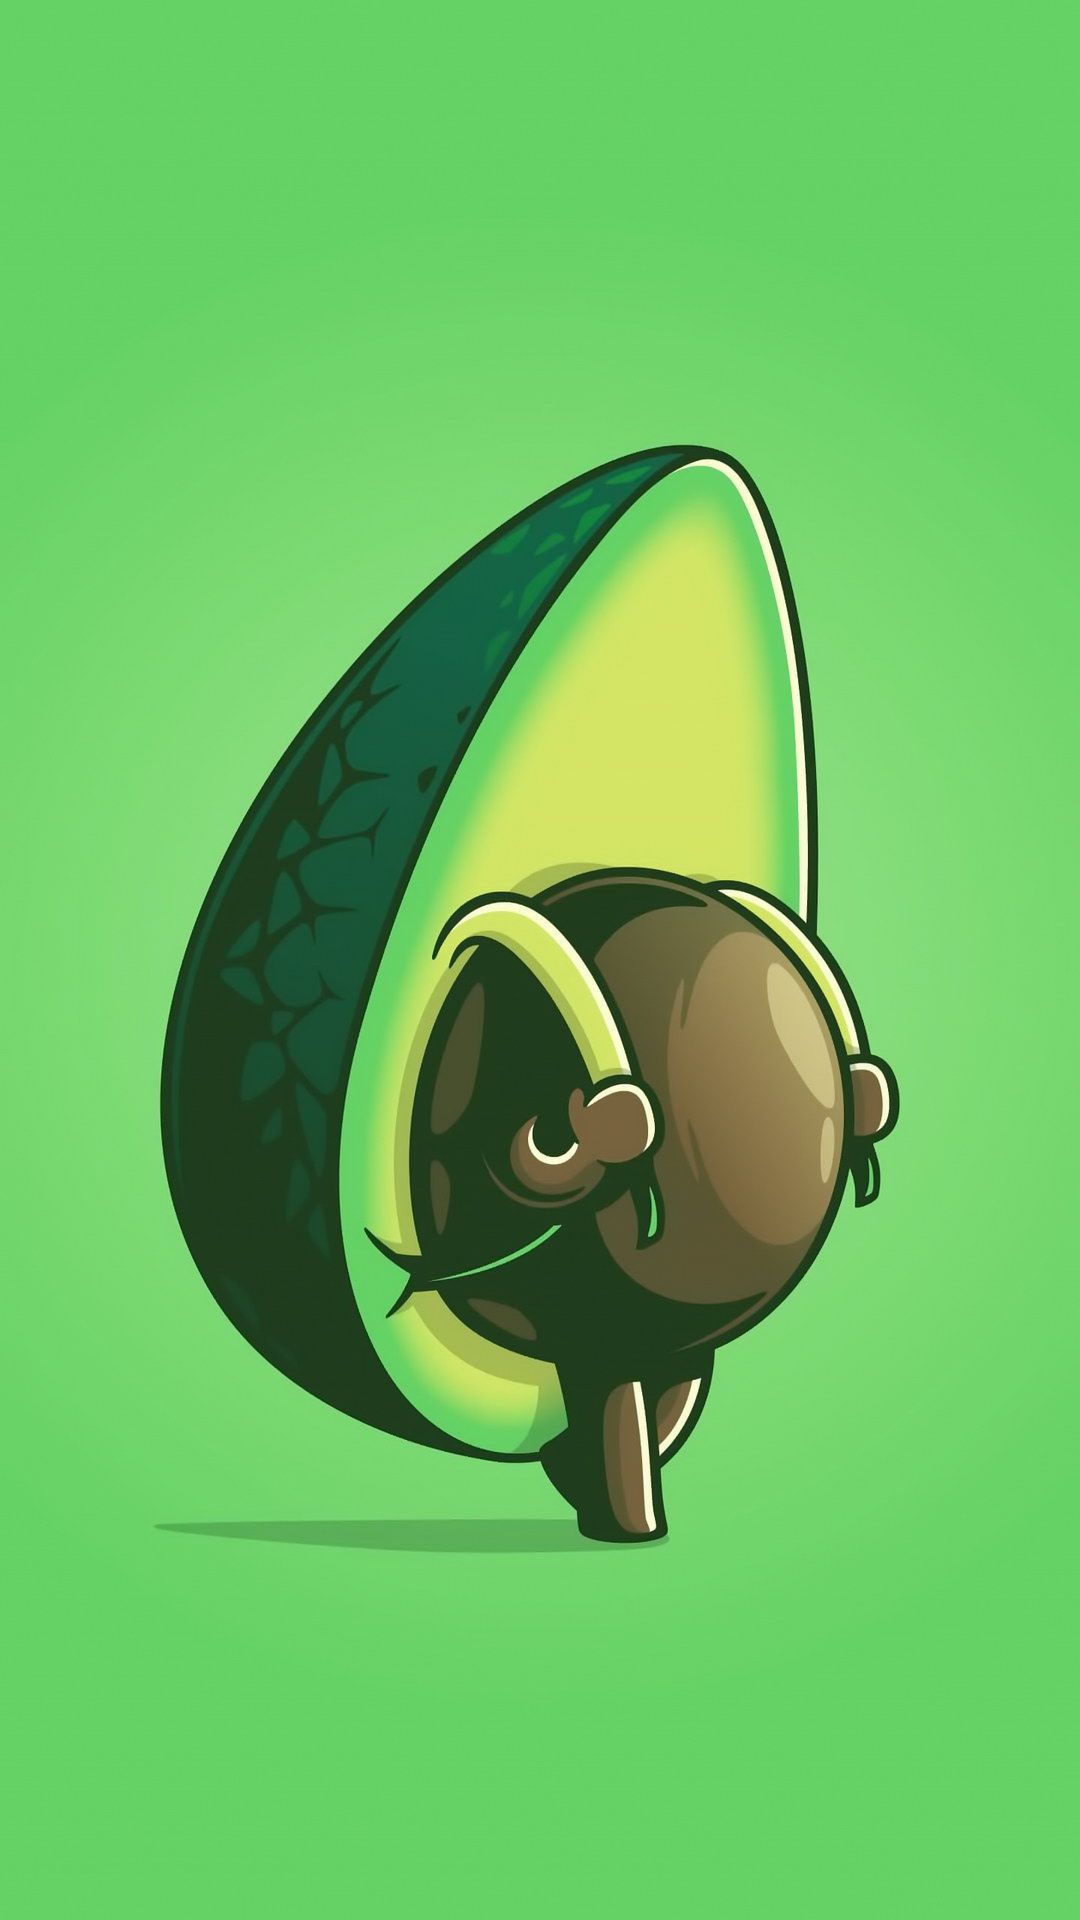 IPhone wallpaper with a green background and an illustration of a cute avocado character holding a heart. - Avocado